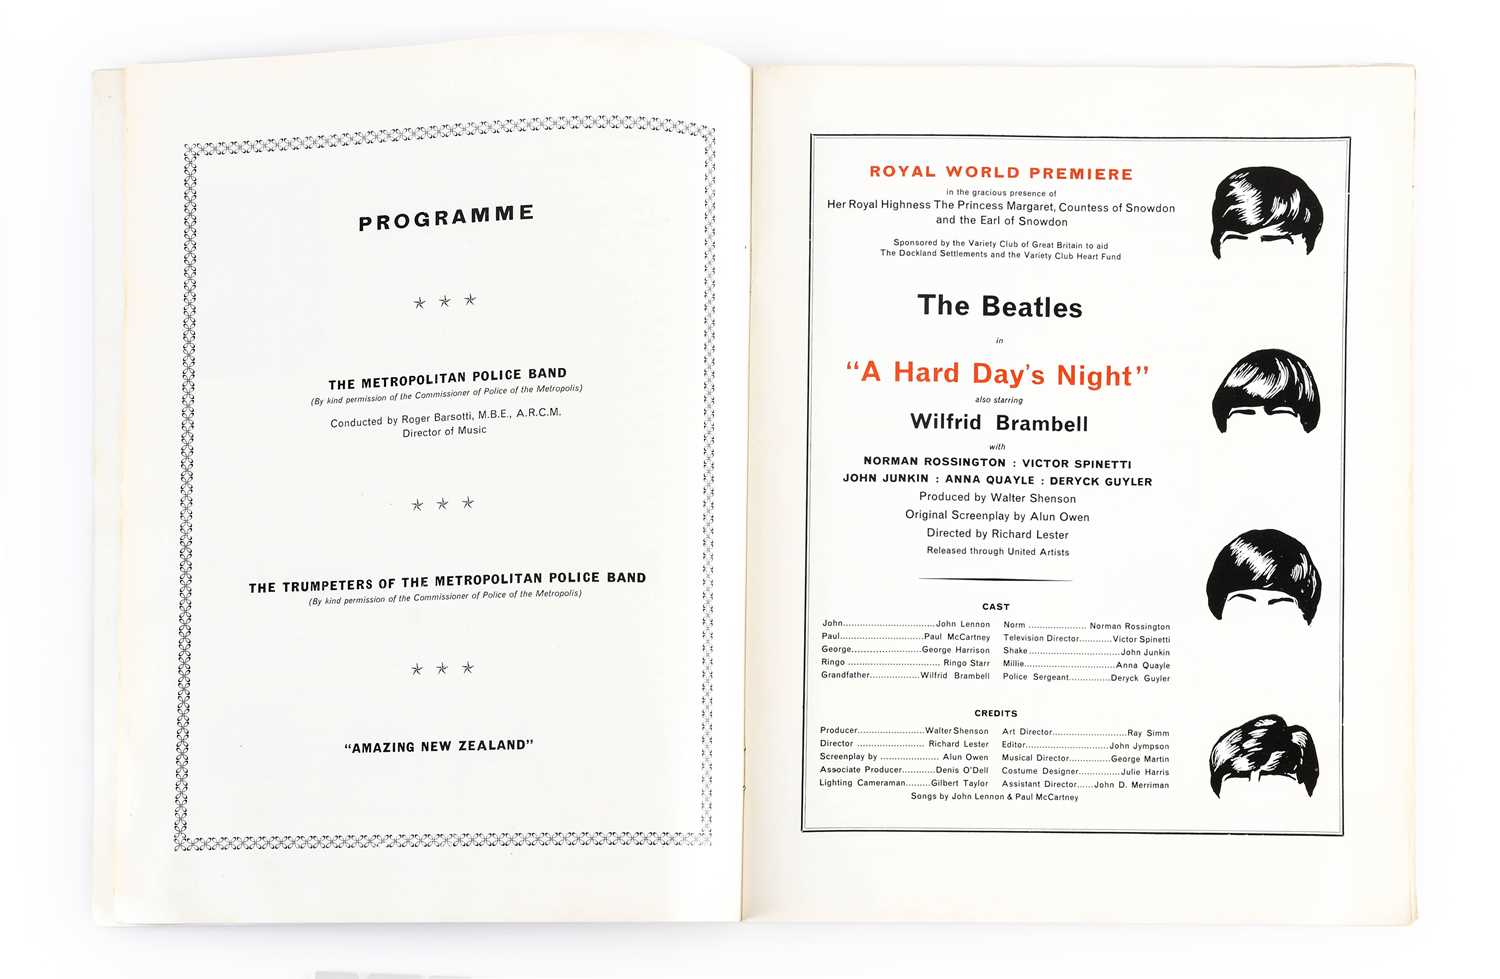 The Beatle A Hard Days Night Royal World Premier Programme - Image 2 of 3